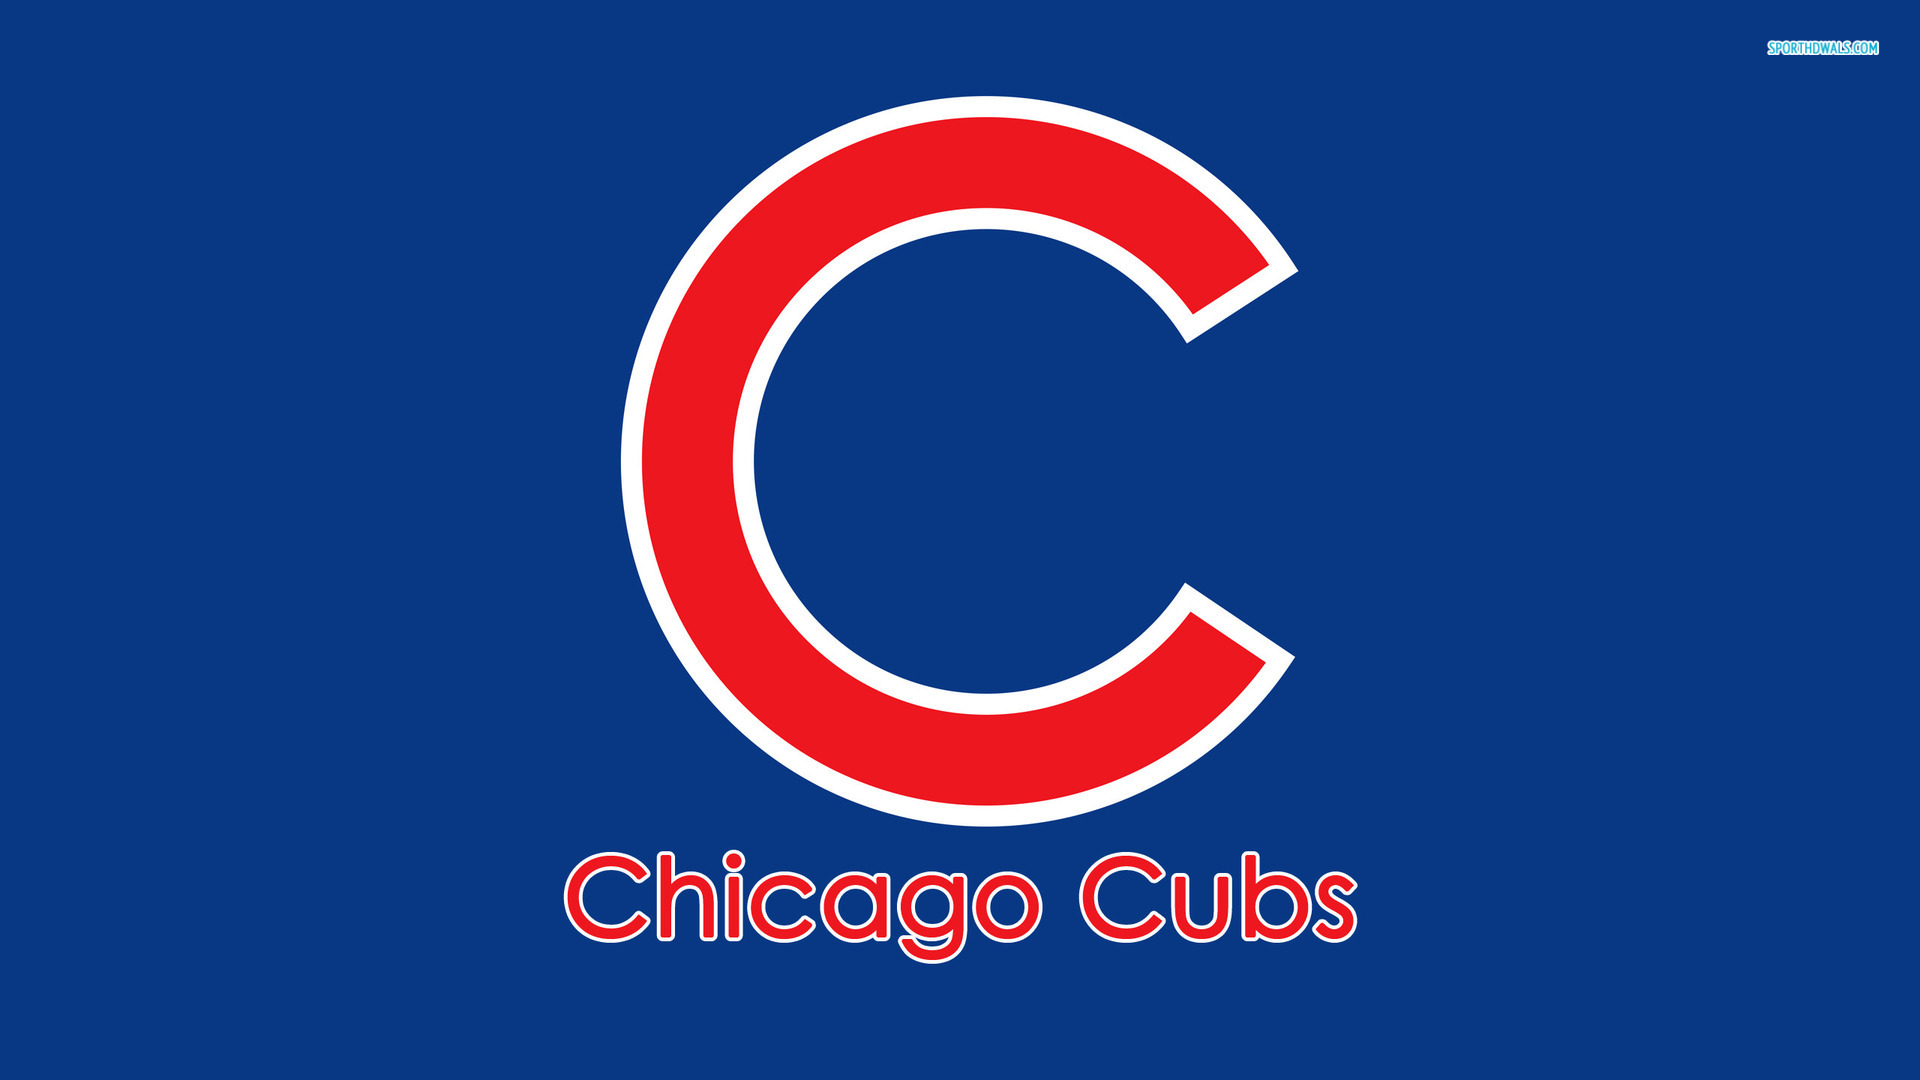 Chicago Cubs Best Wallpapers 24341 Images | largepict.